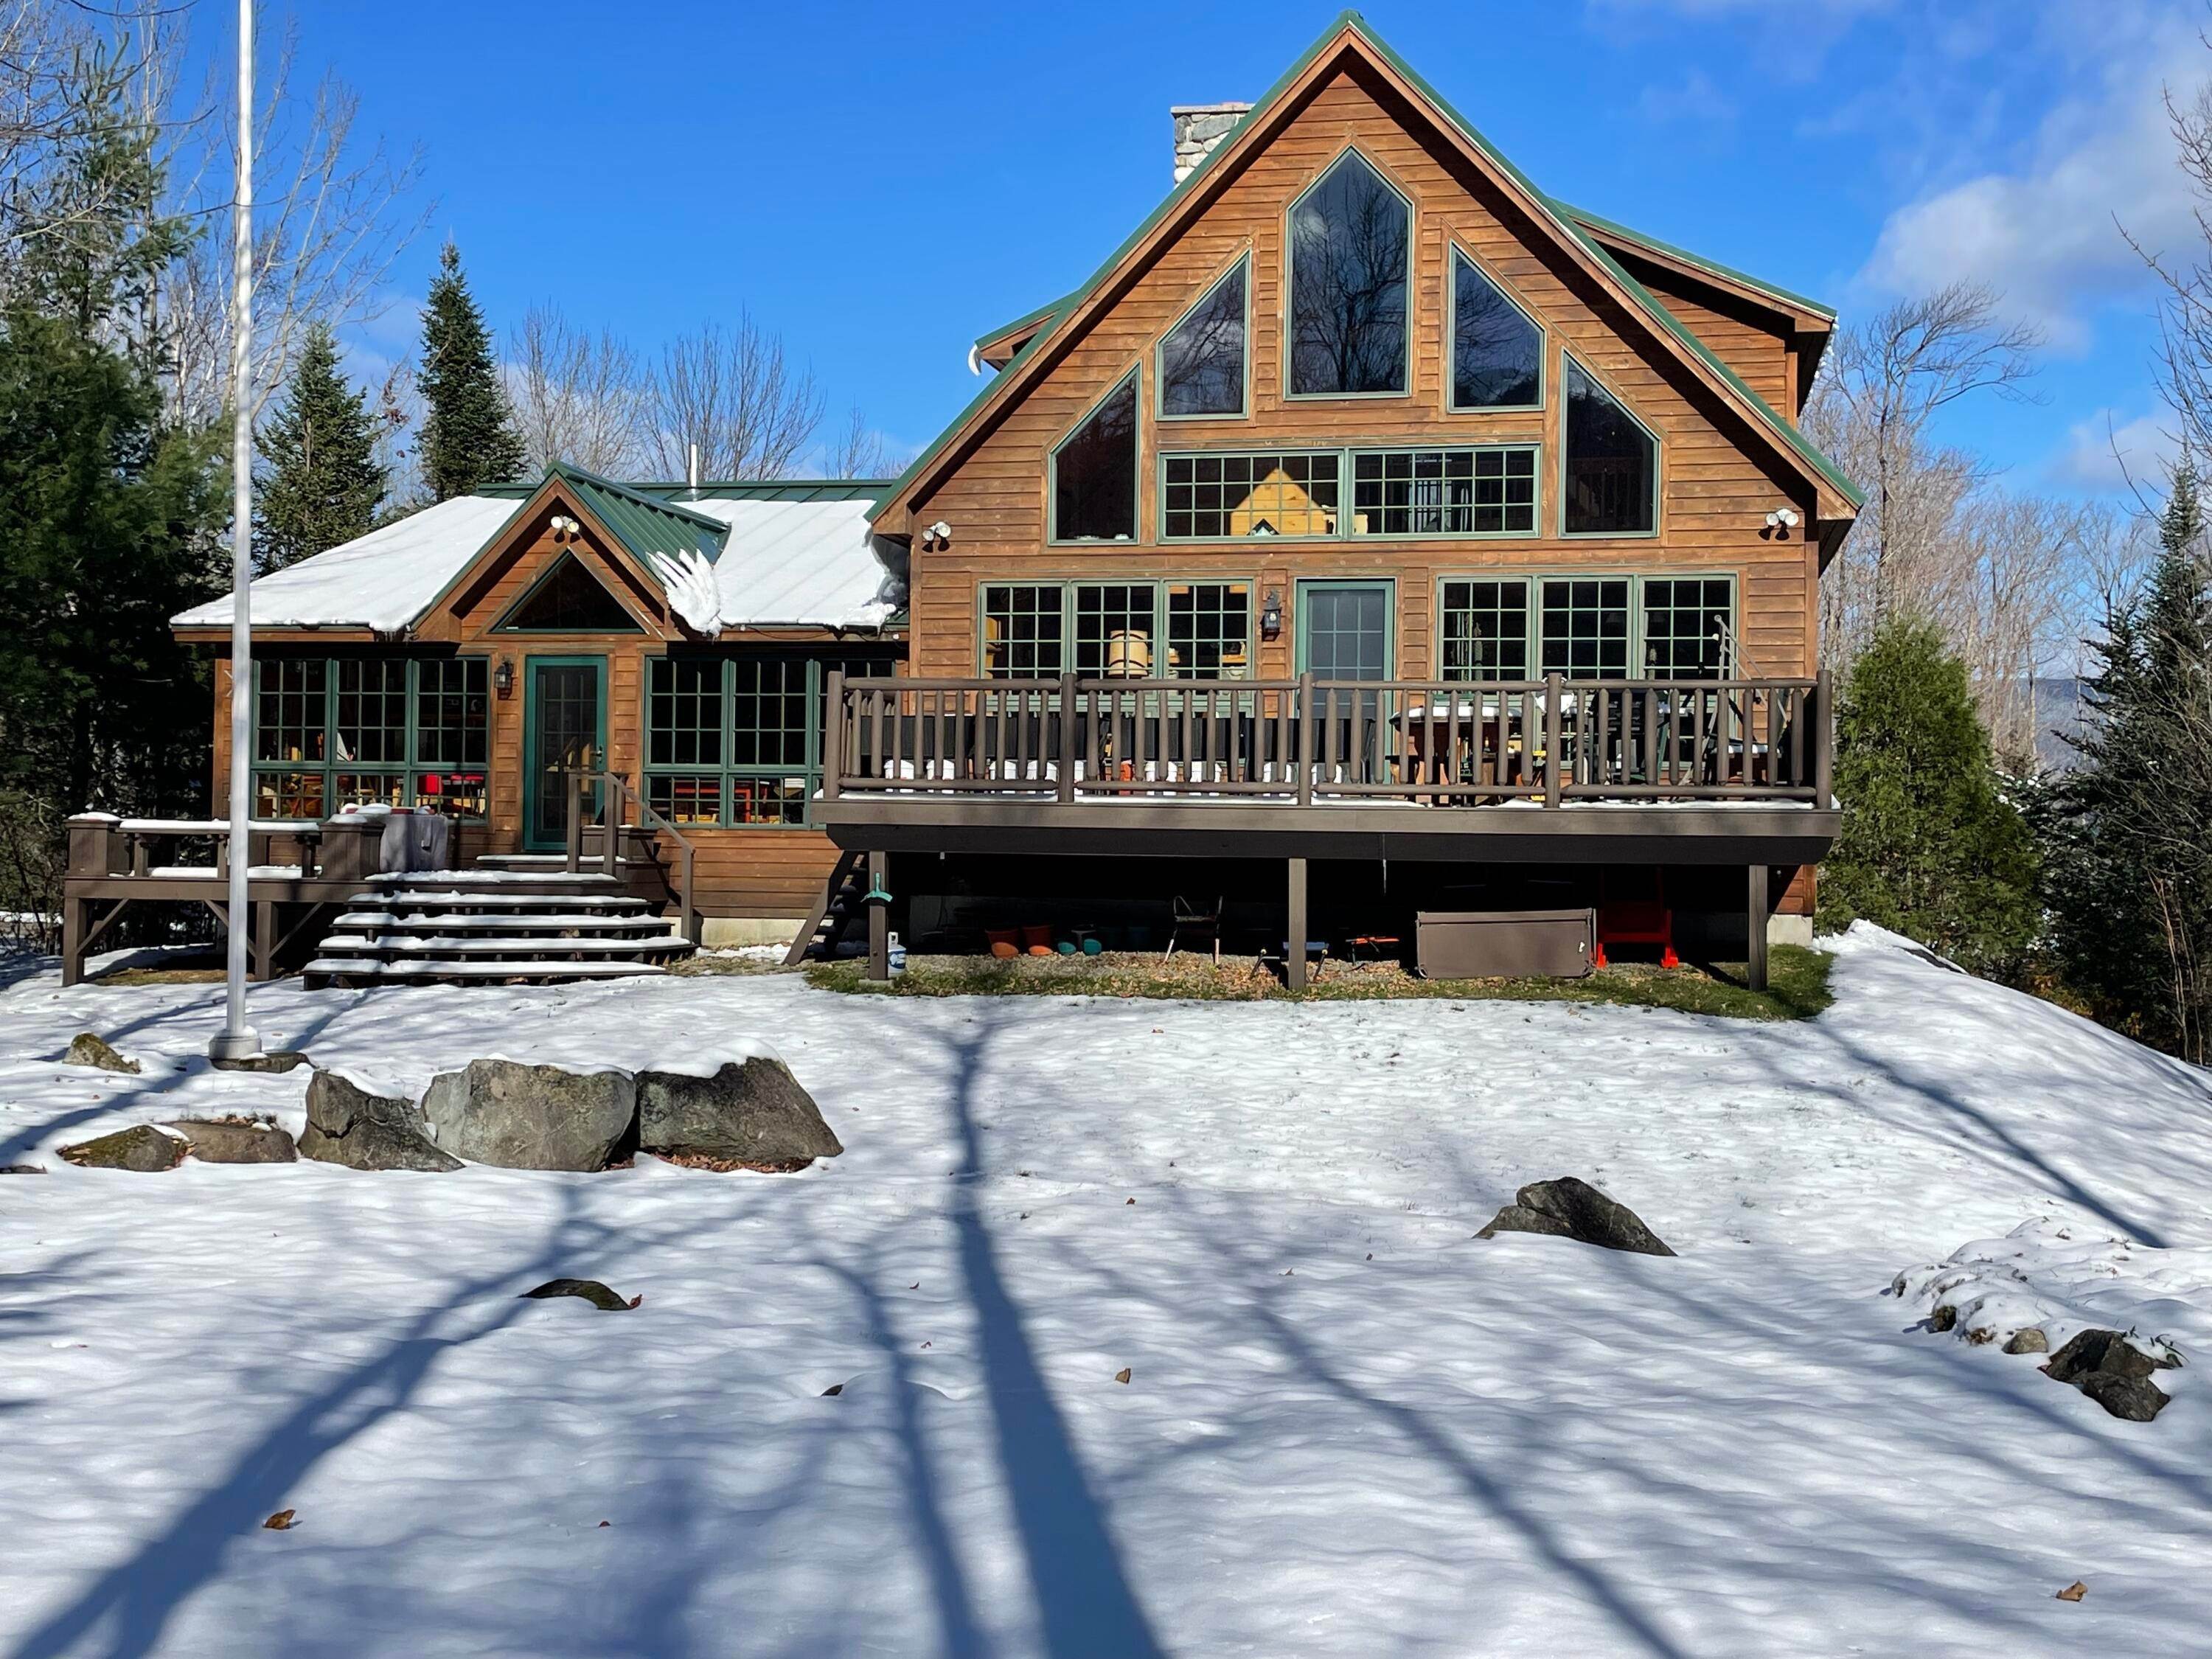 Property for Sale at Carrabassett Valley, ME 04947